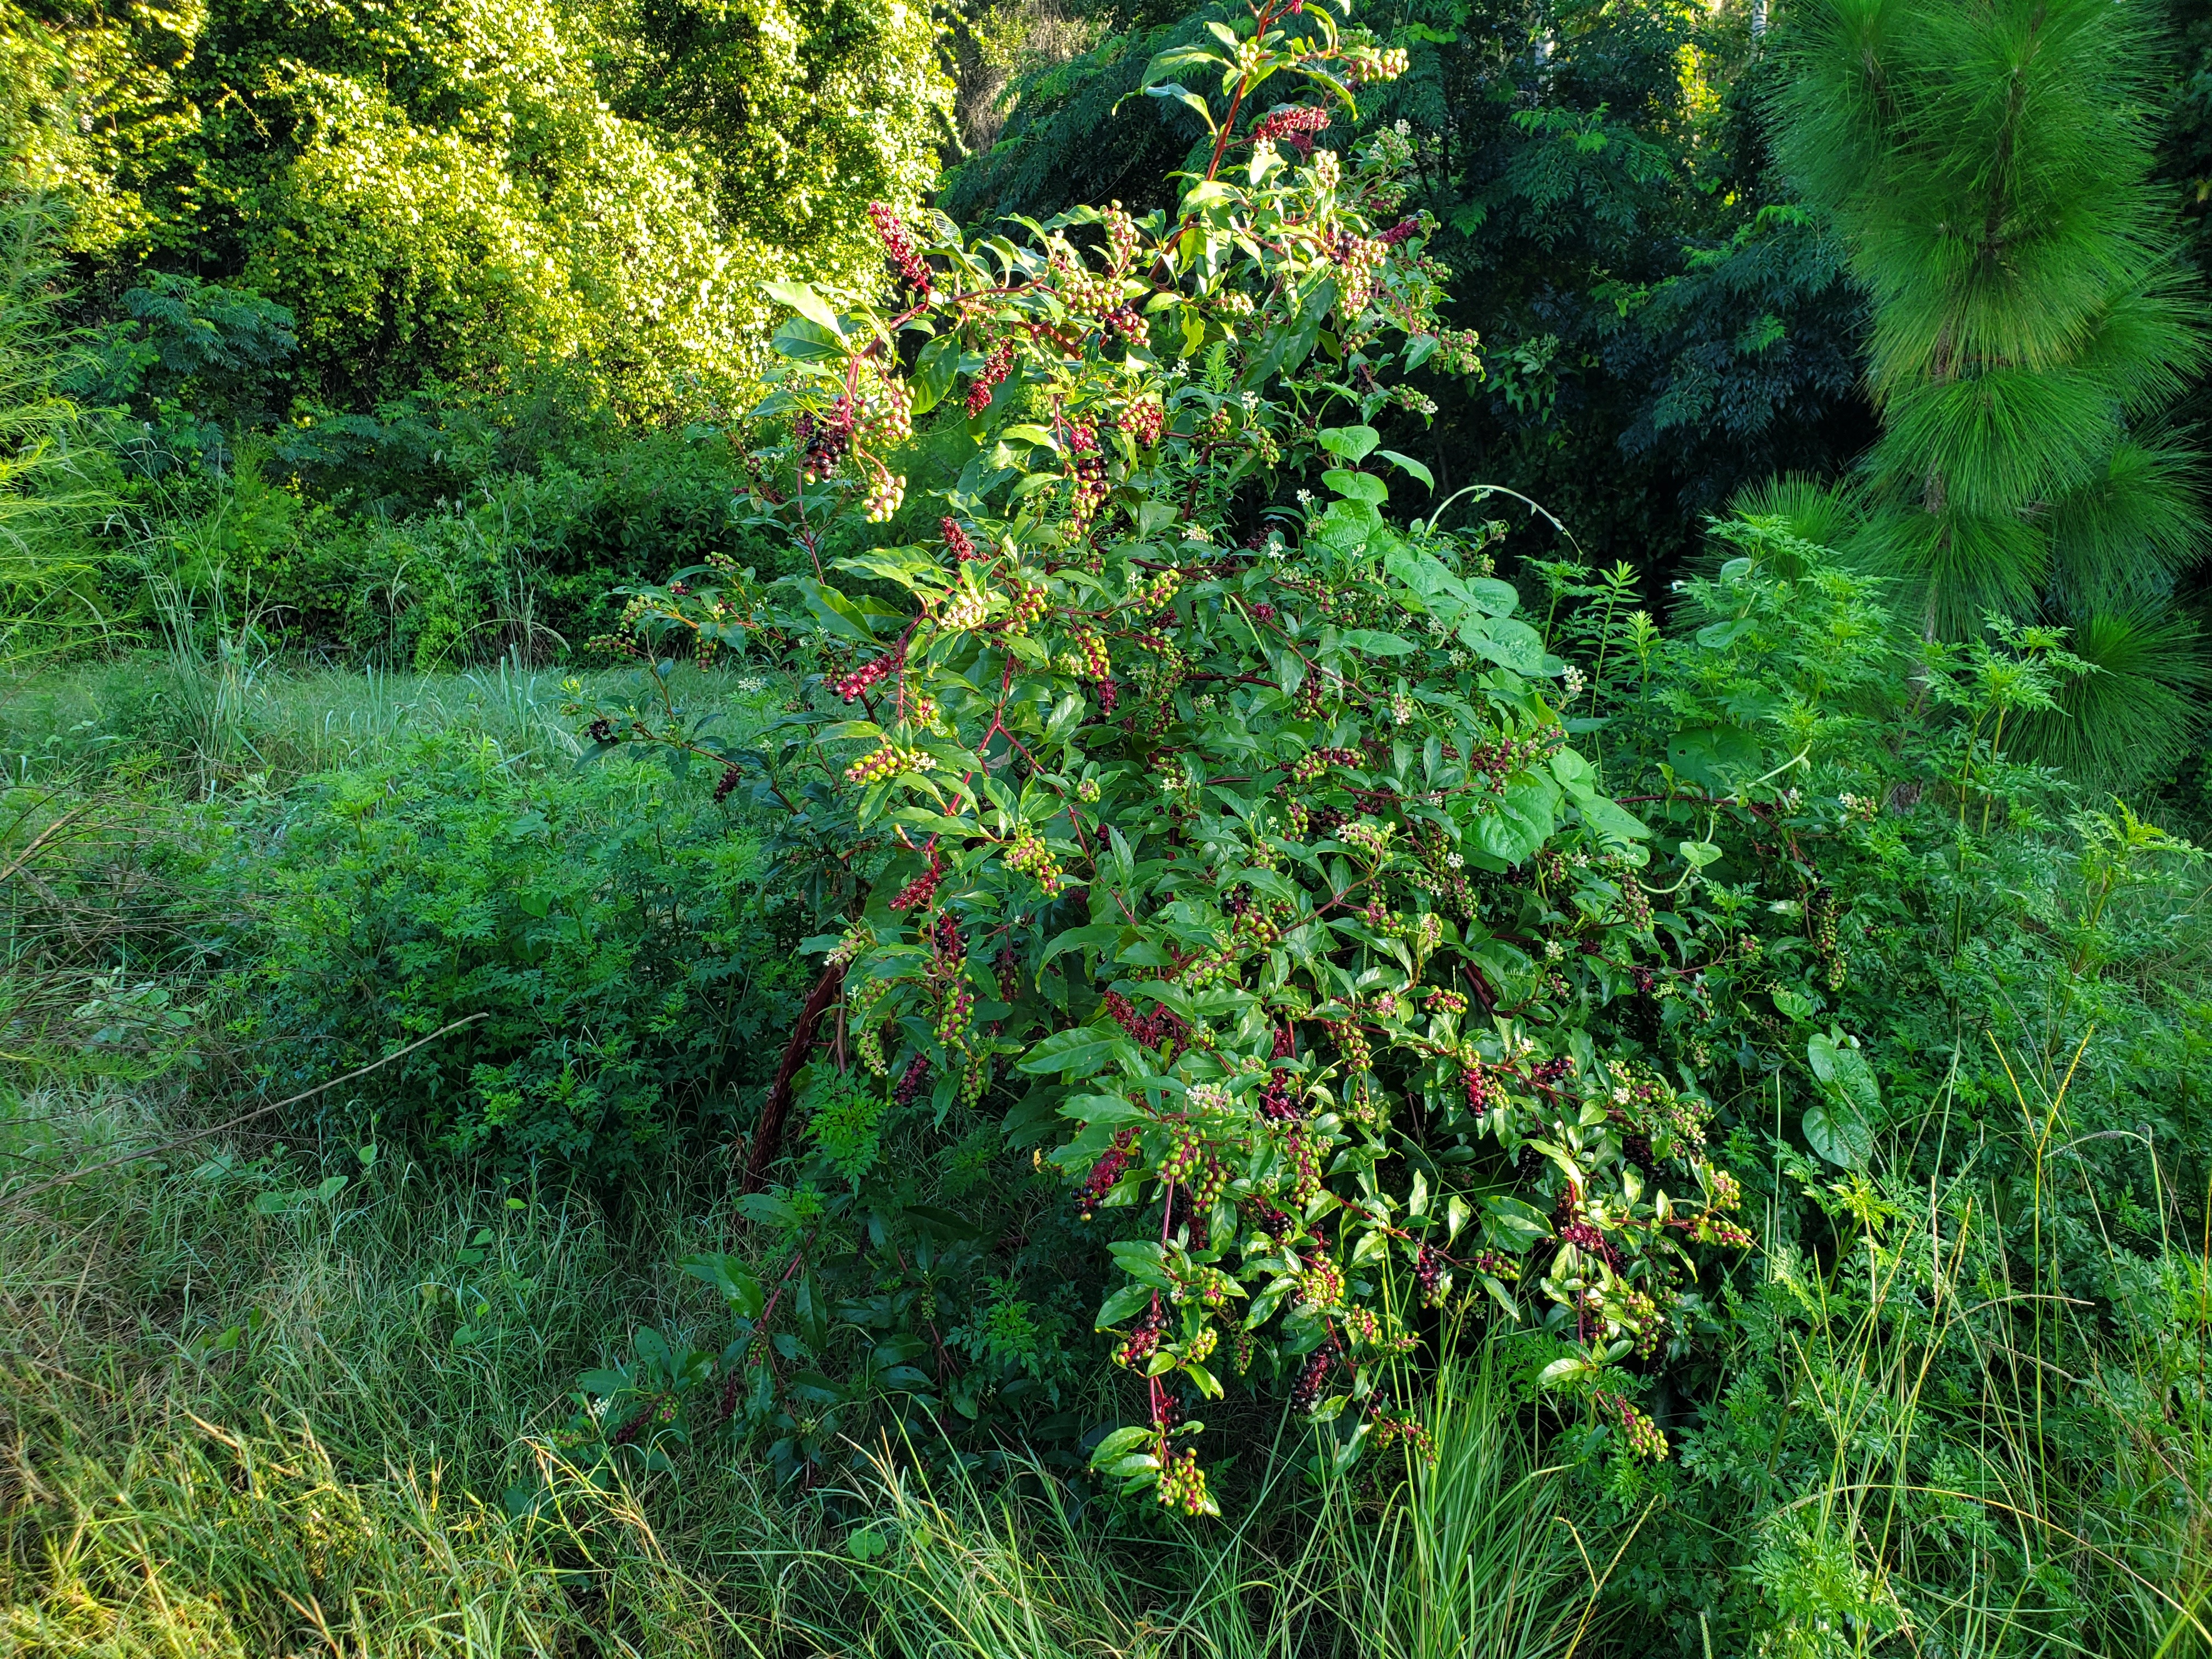 Pokeberry with longleaf and chinaberry